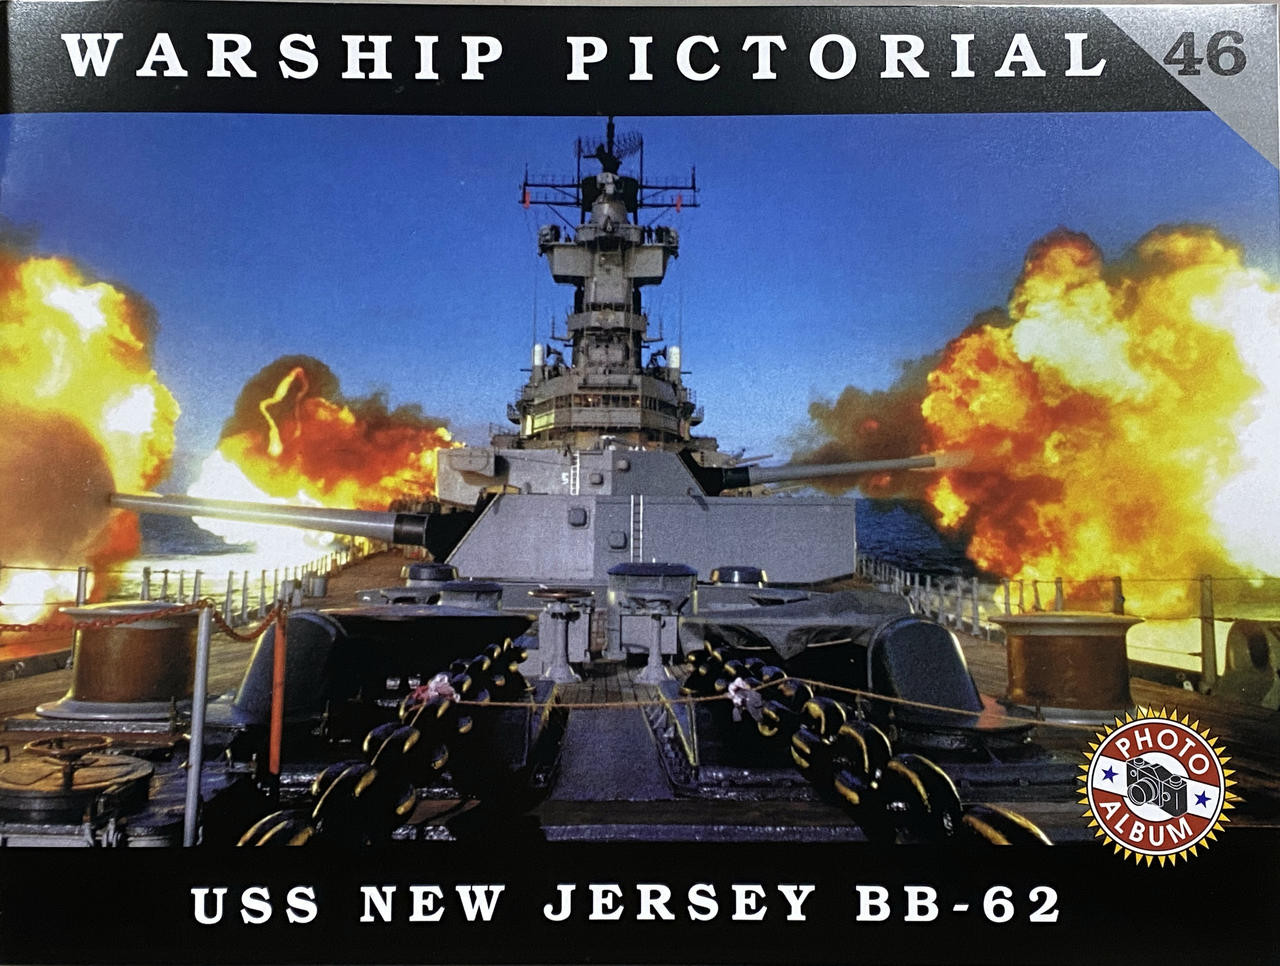 CWP46 CWP46 - Classic Warships Pictorial USS New Jersey BB-62 46 MMD Squadron